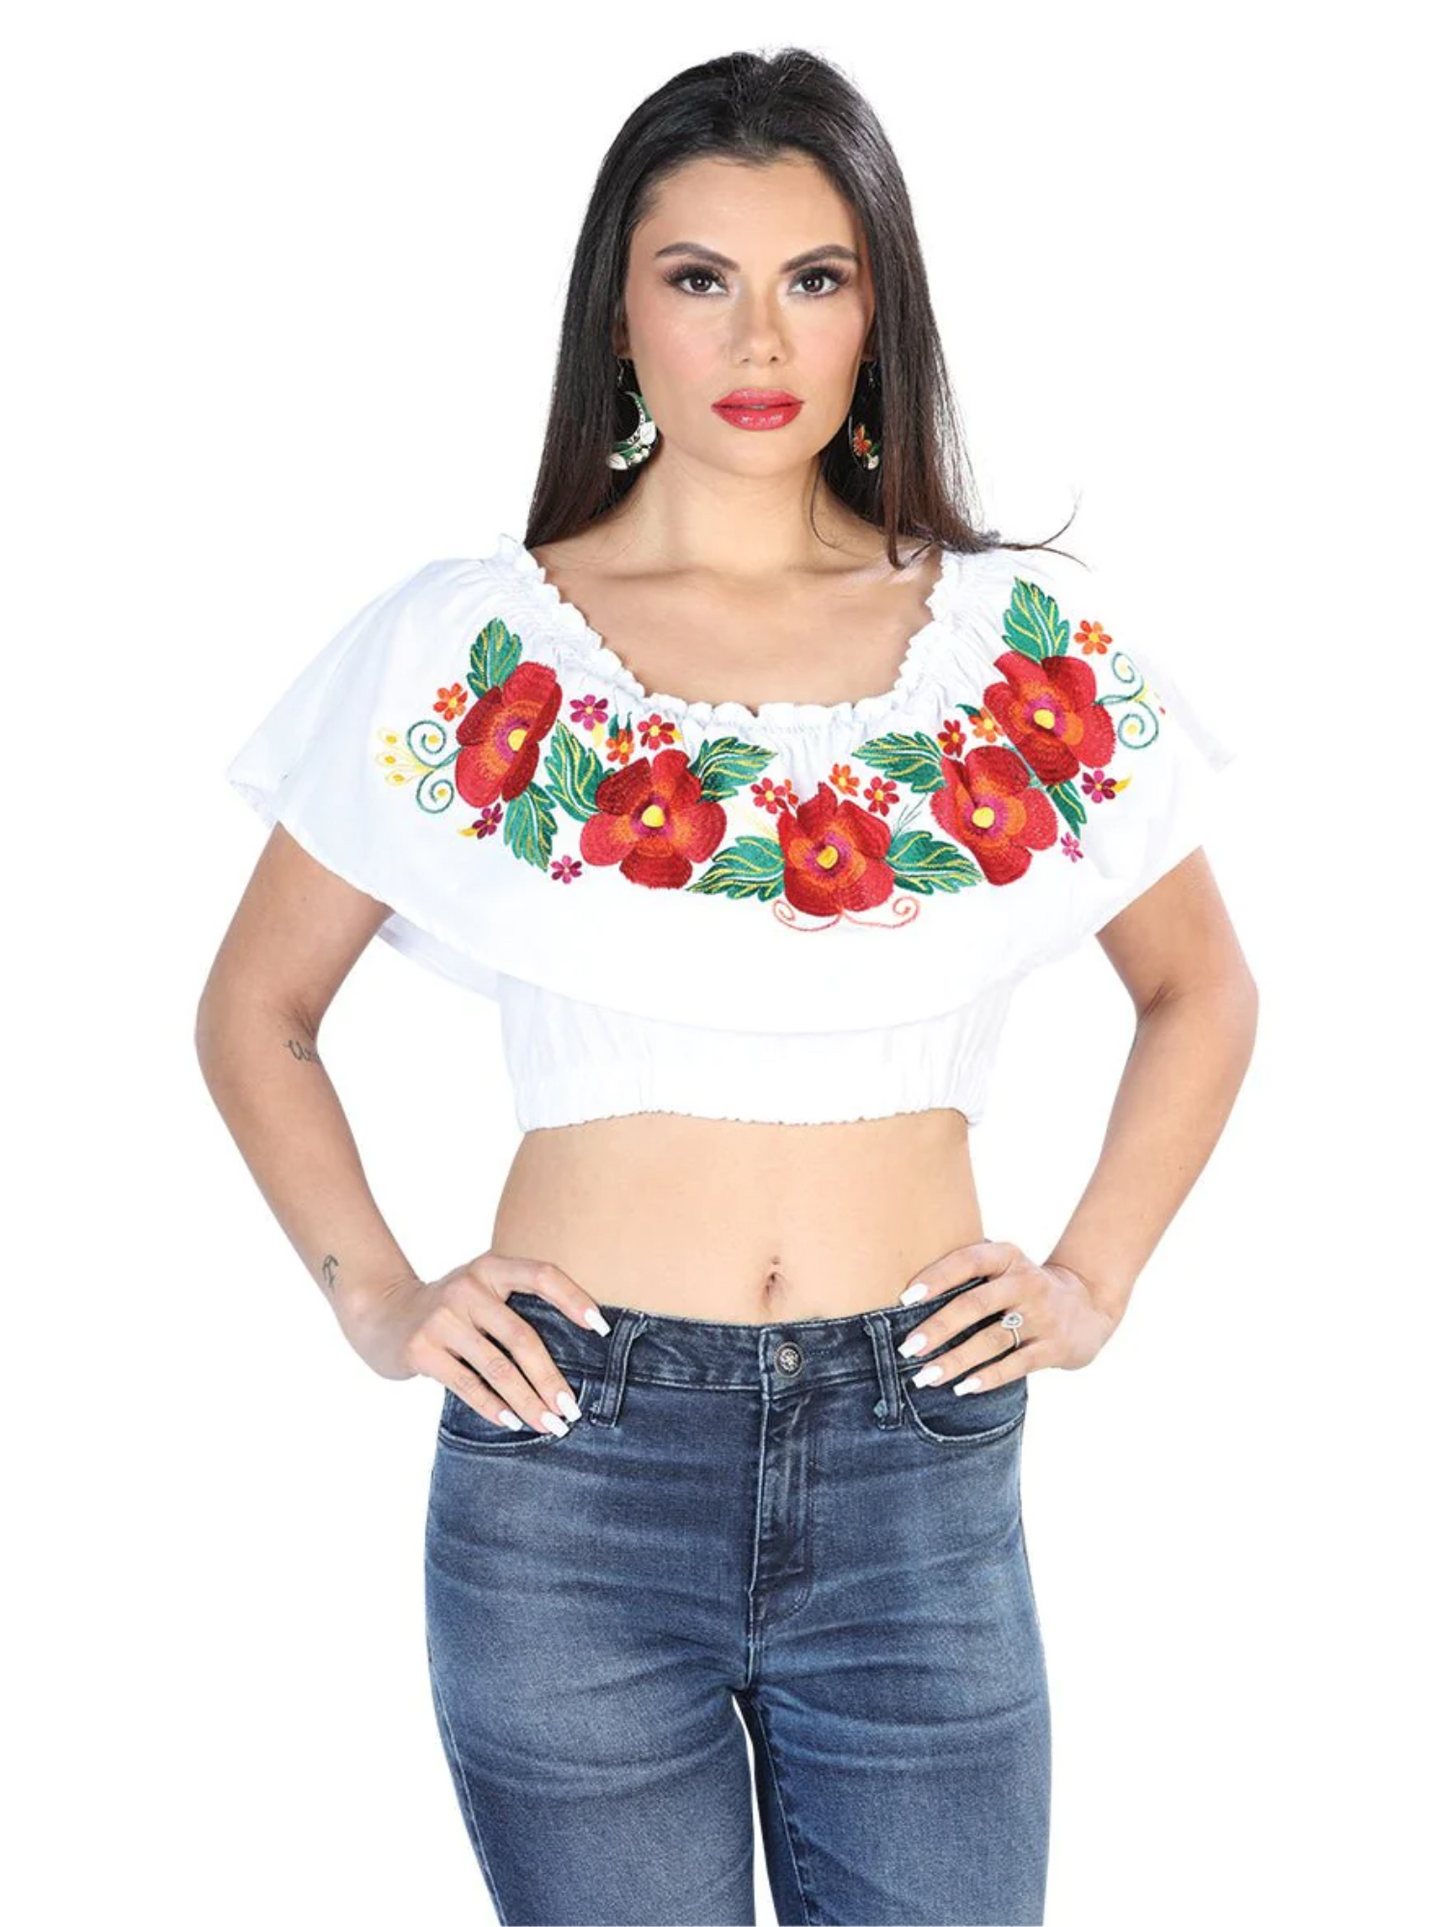 Olan Artisanal Short Blouse Embroidered with Flowers for Women Handmade Crop Top Mexico Artesanal White